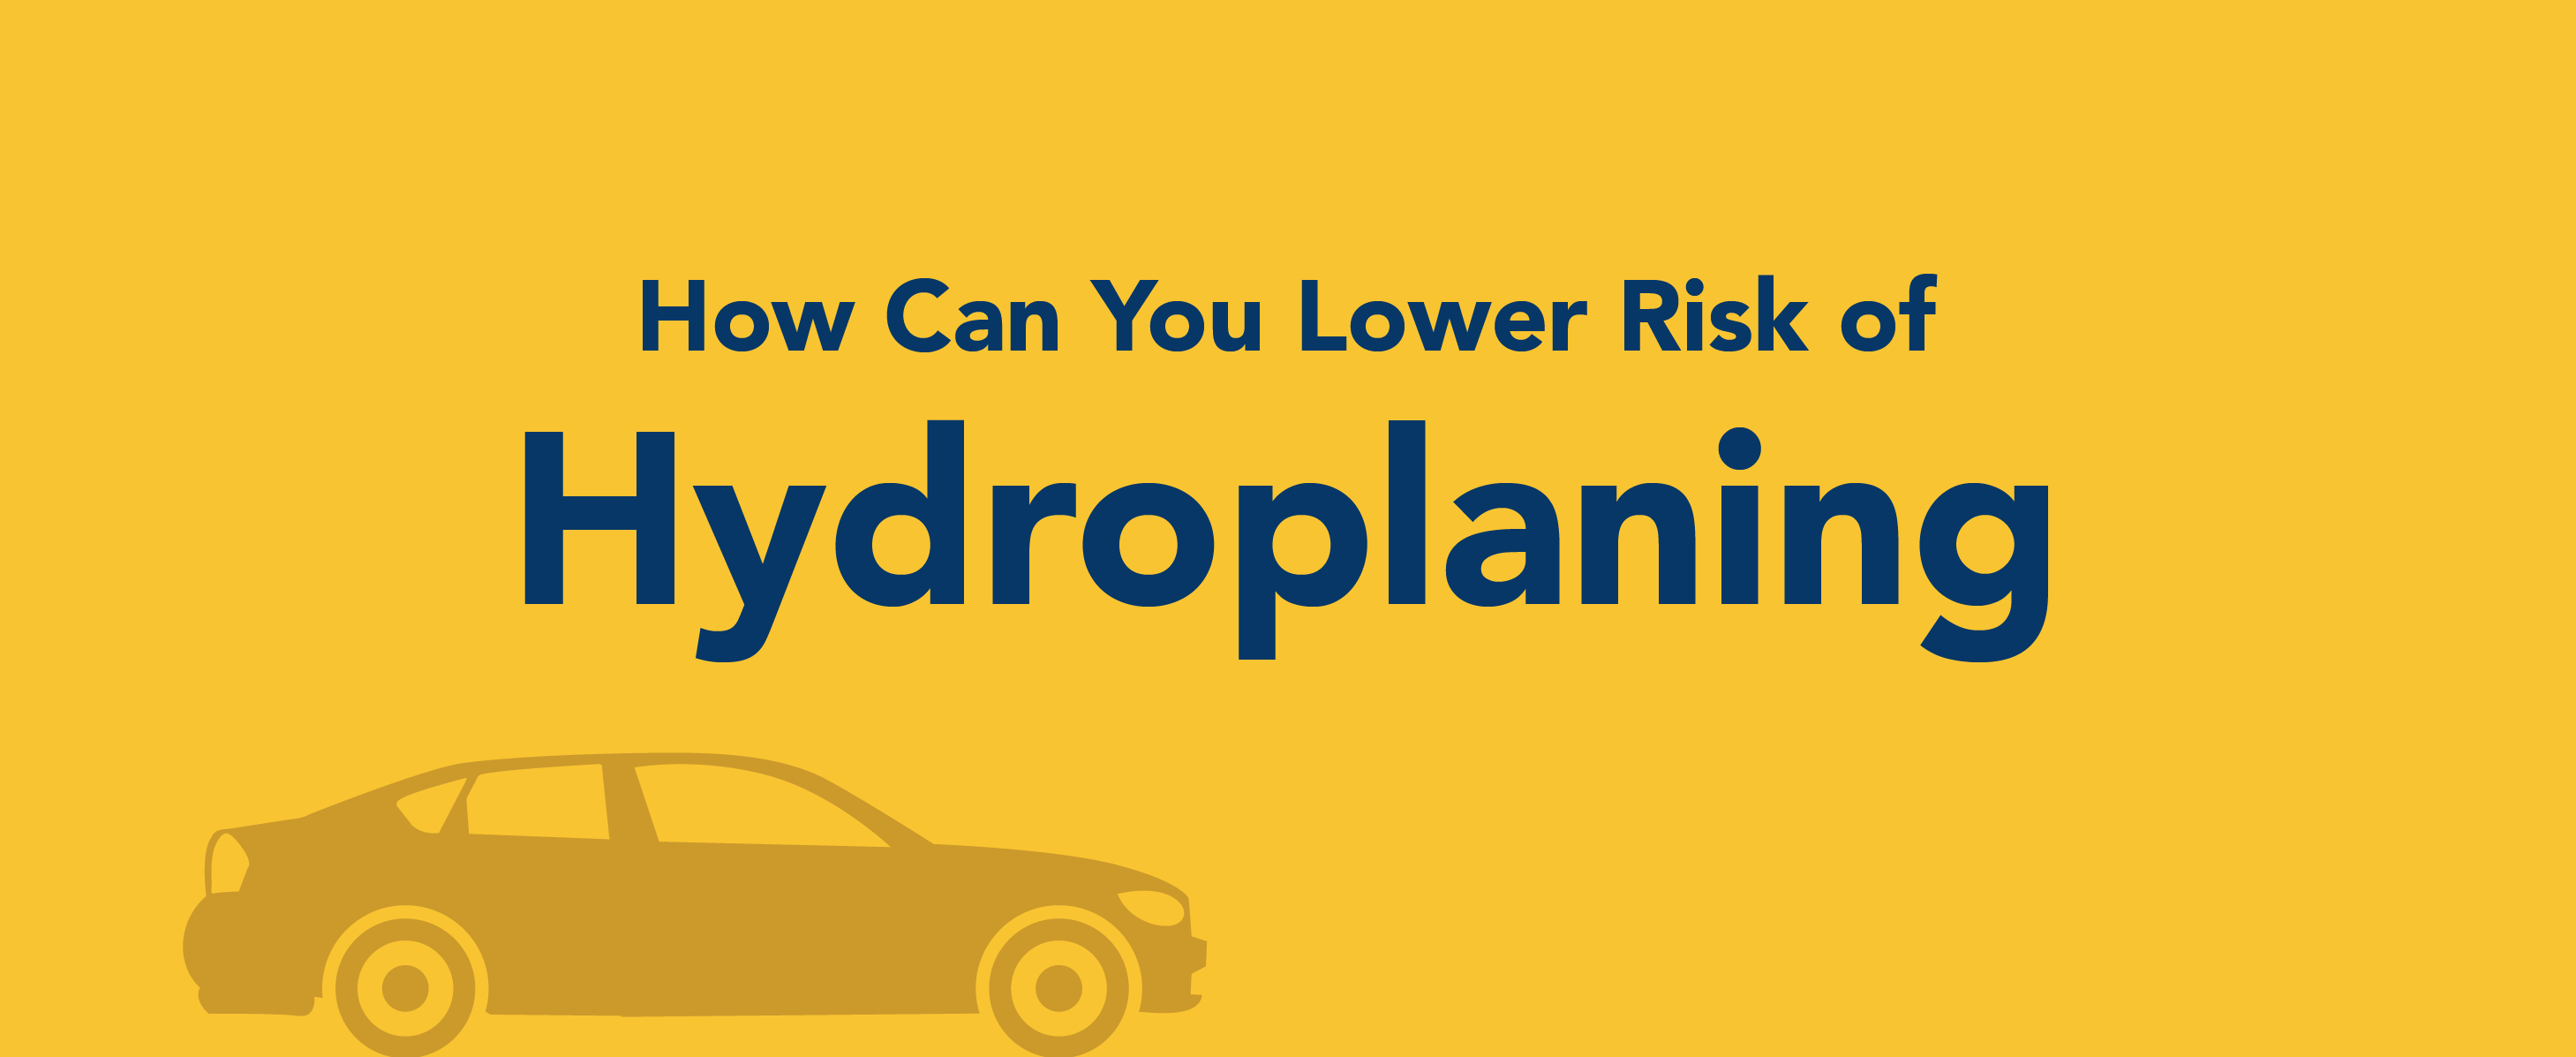 How can you lower risk of hydroplaning.